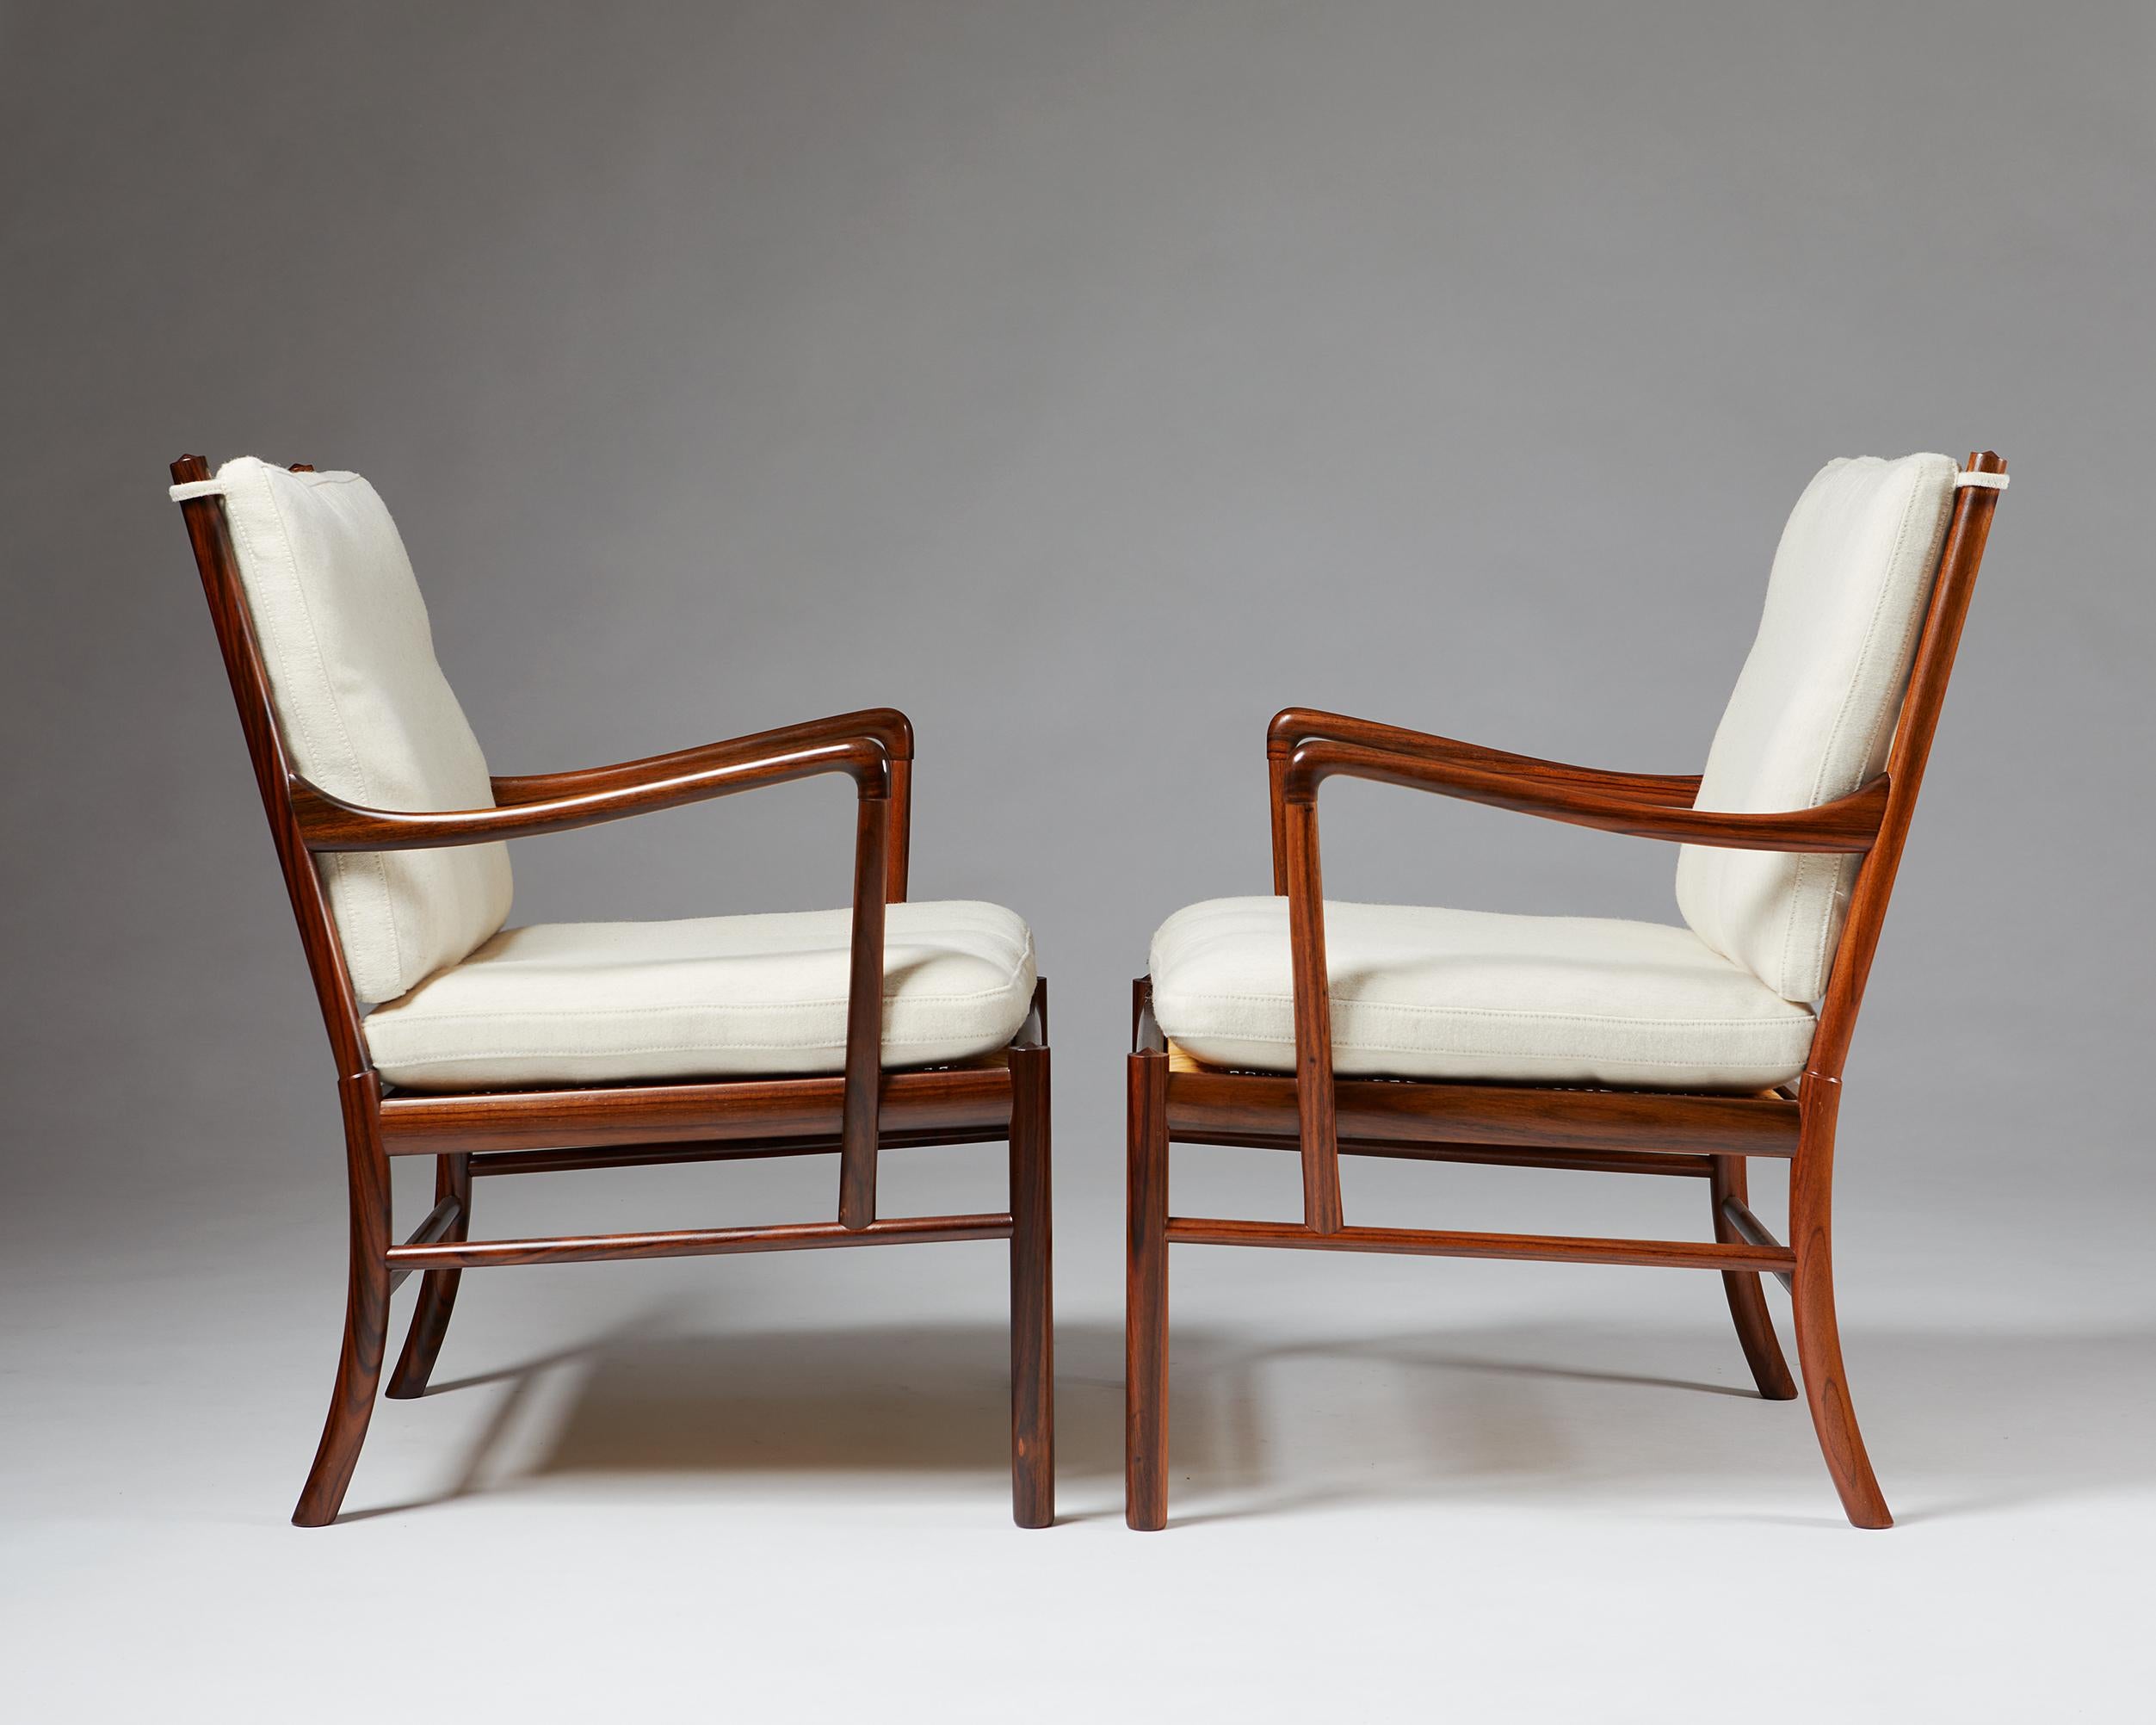 Danish Pair of Armchairs, PJ 149, “Colonial”, Designed by Ole Wanscher for P. Jeppesen